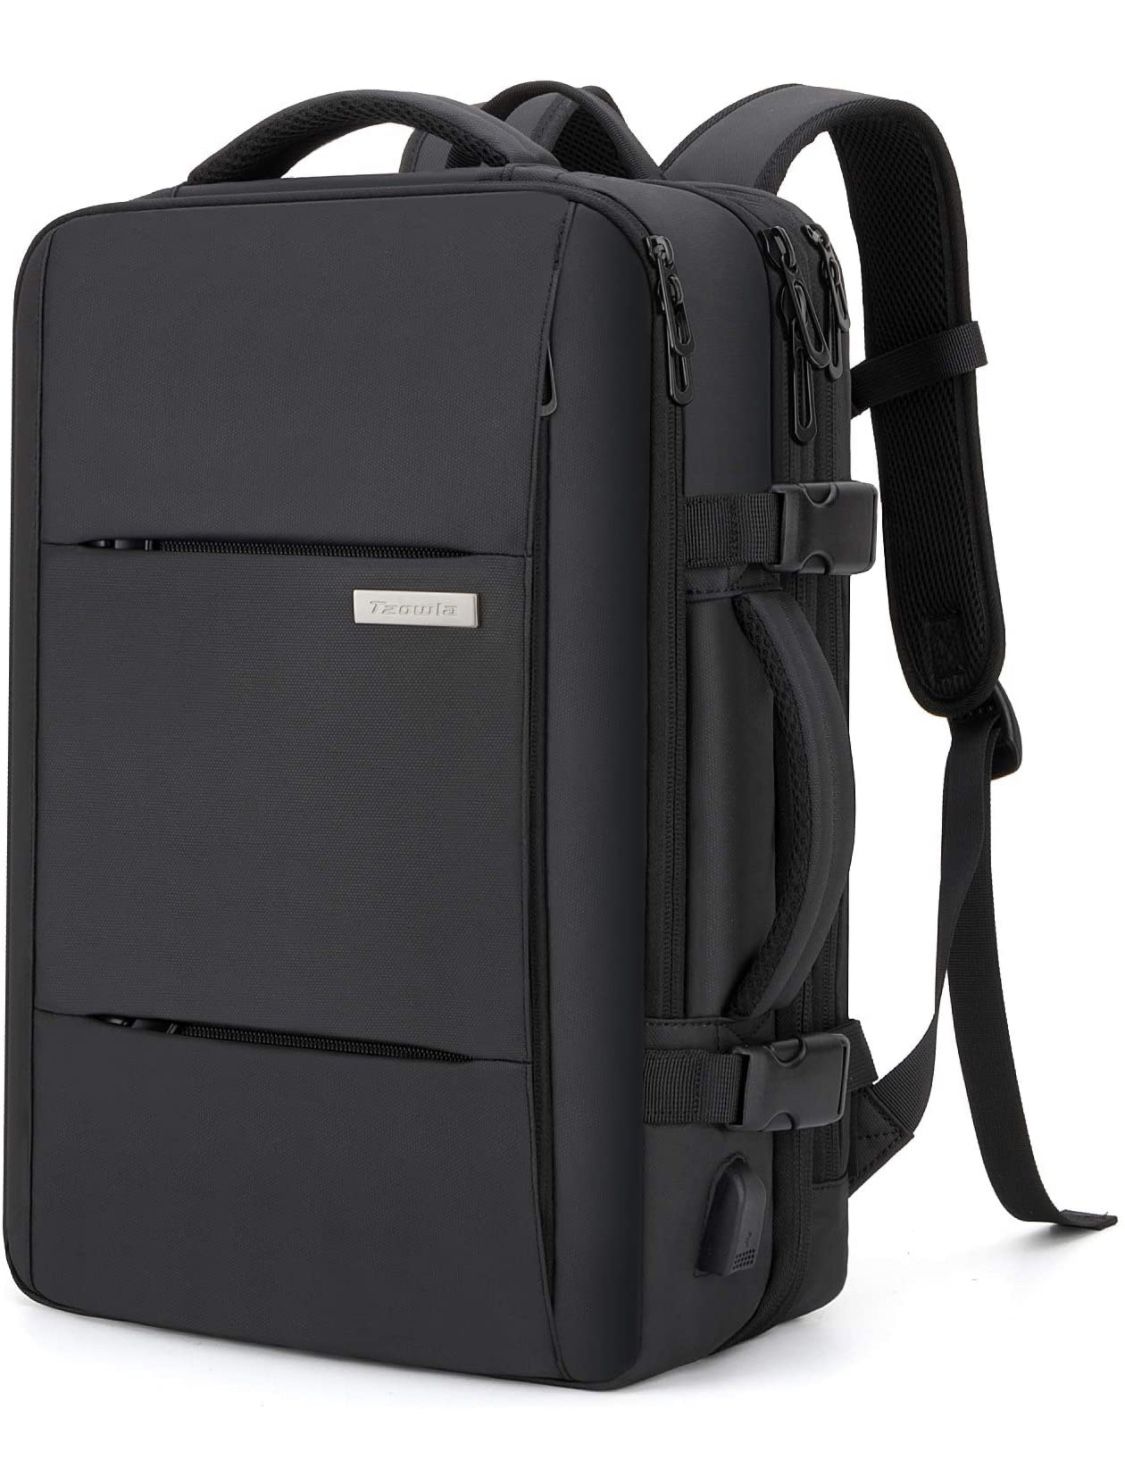 Brand New - 40L Carry On Travel Laptop Backpack